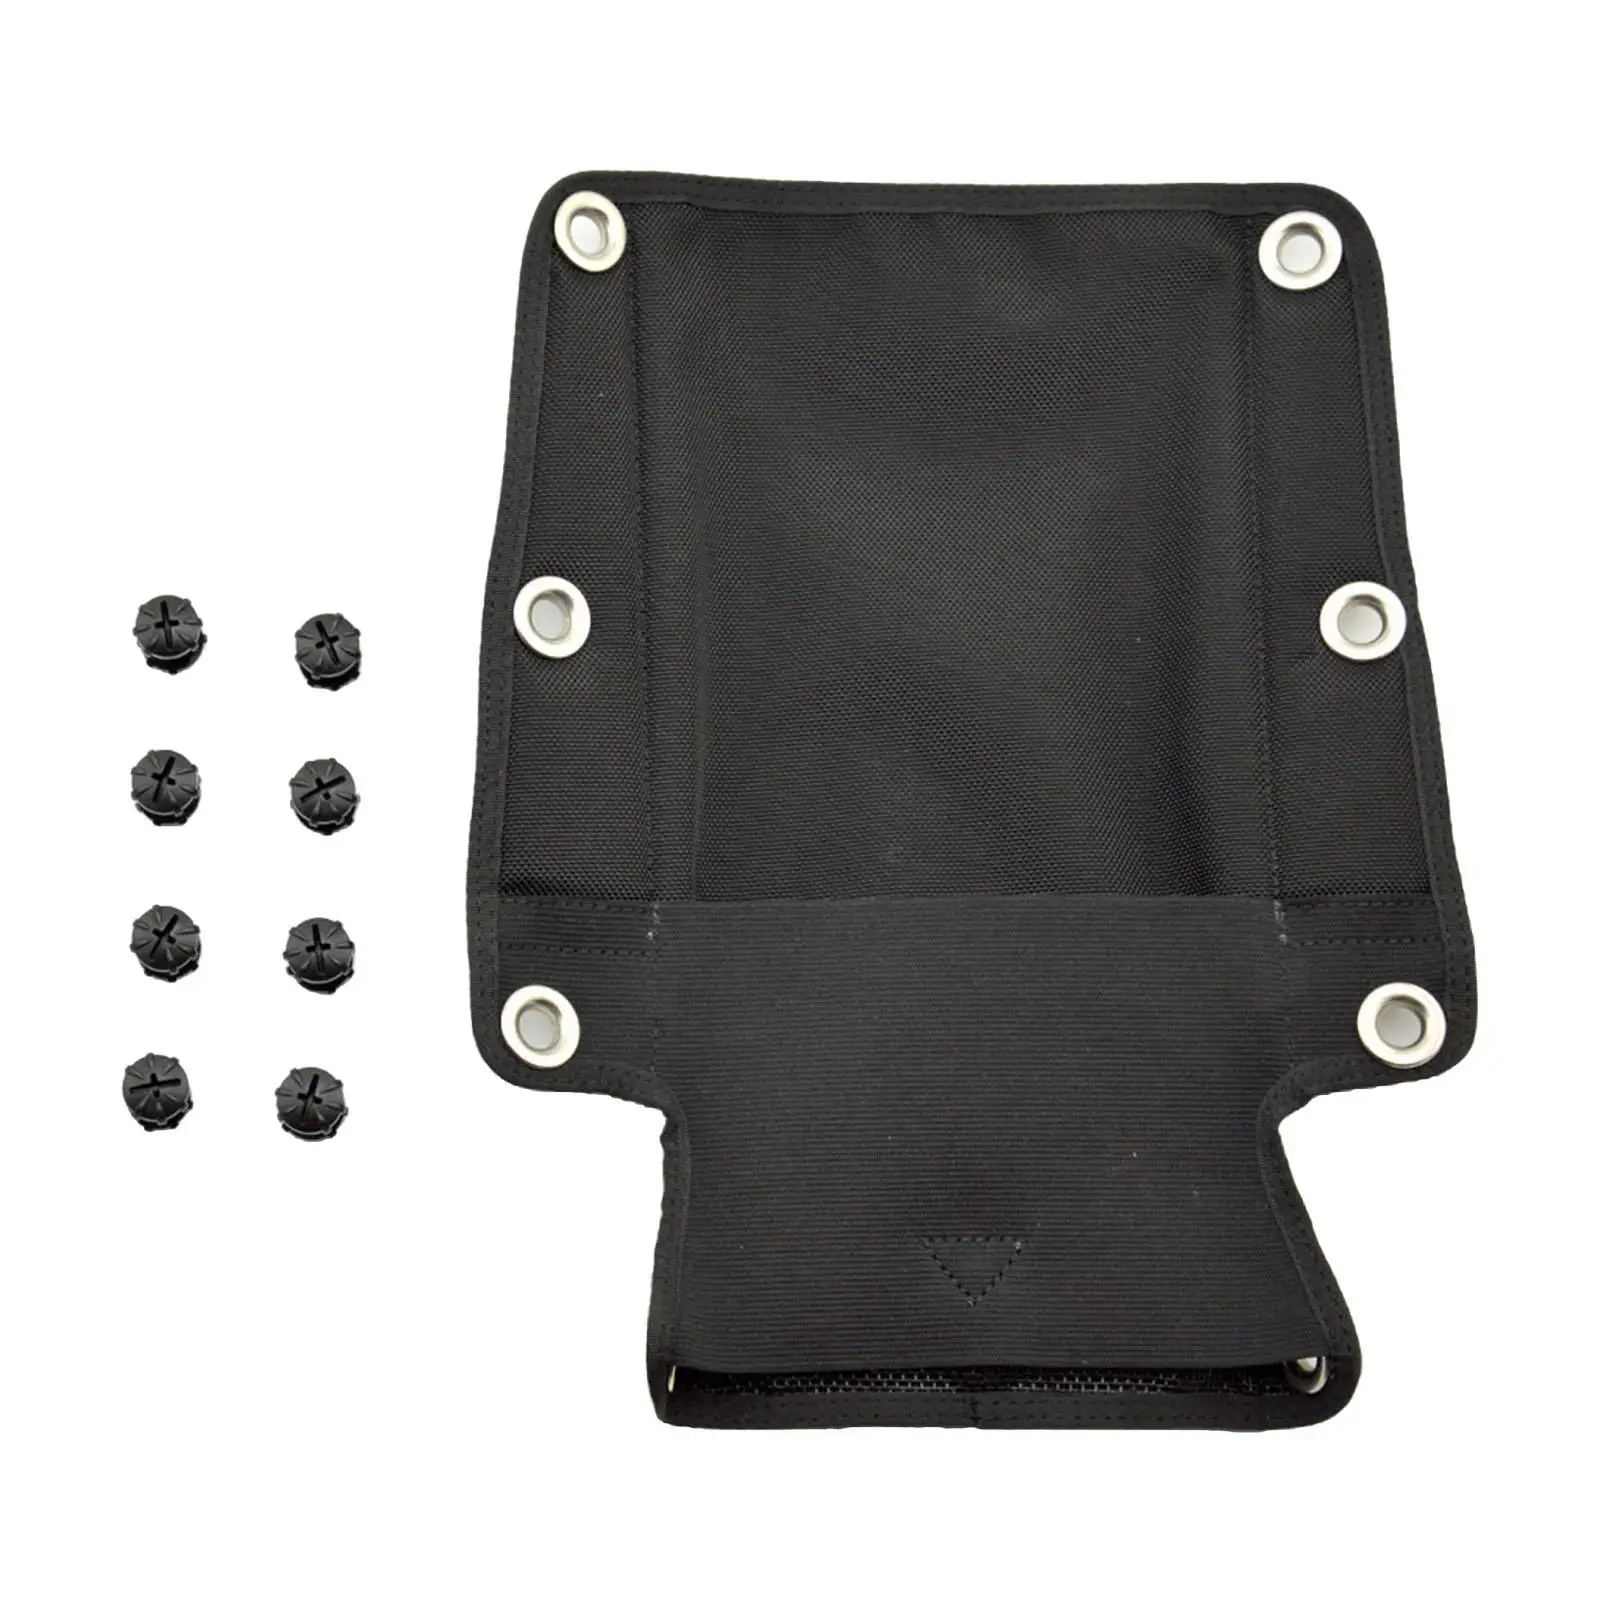 Scuba Diving Backplate Pad with Screws with Storage Pocket Nylon for Harness